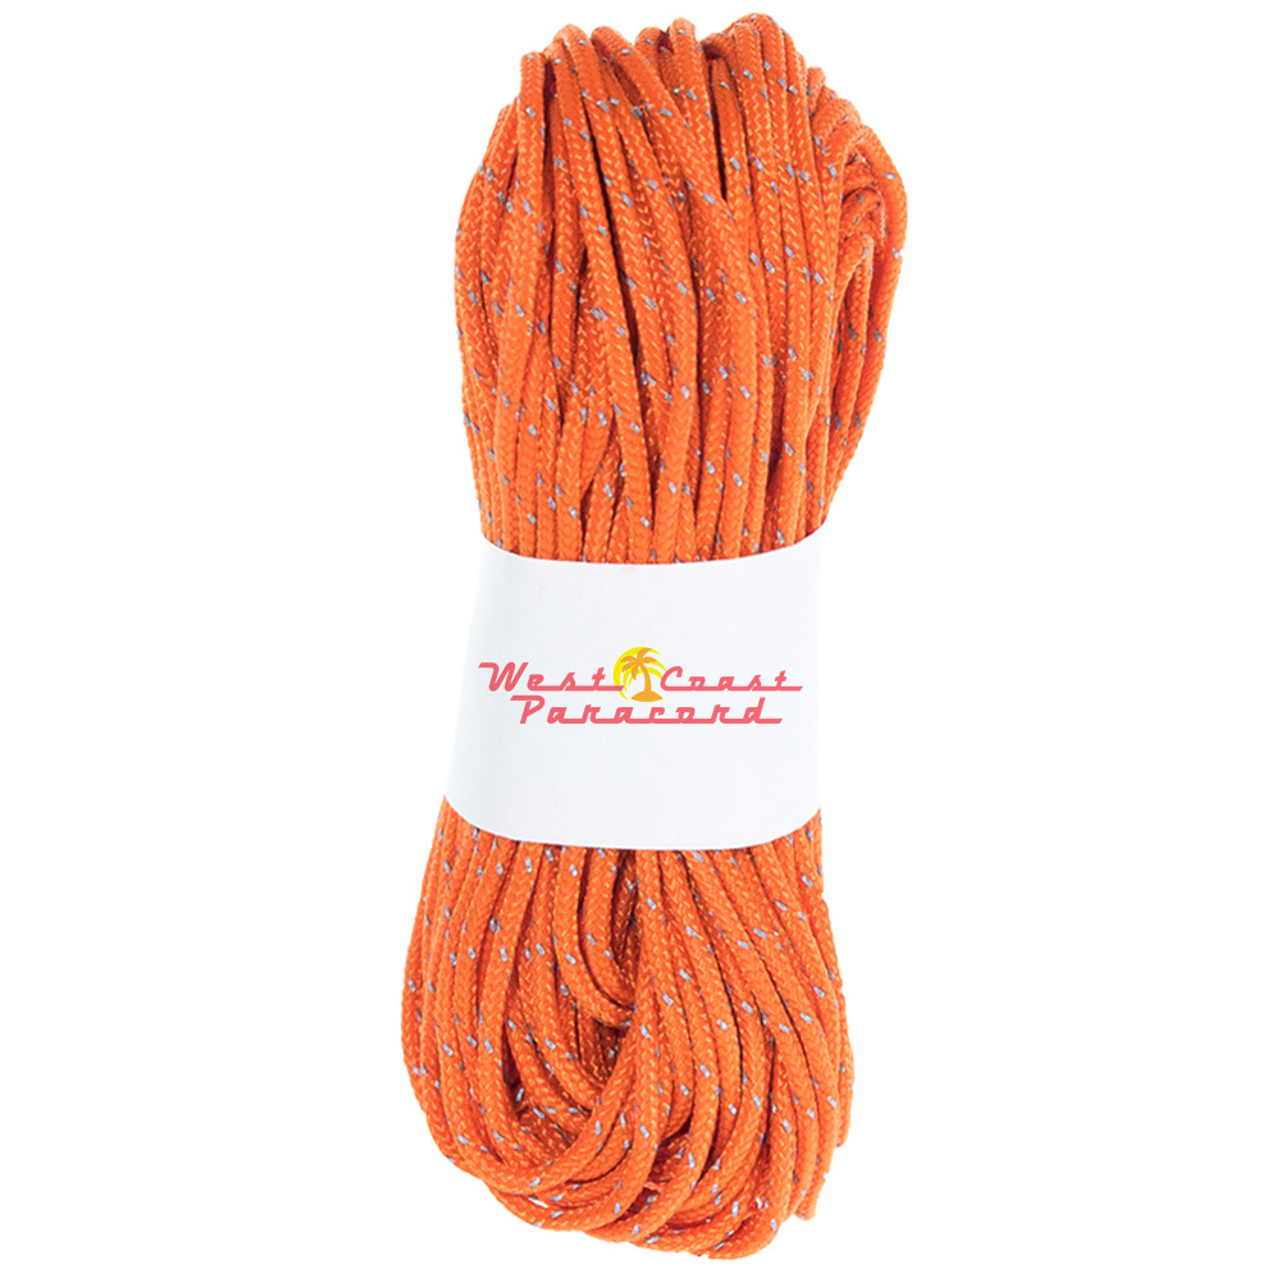 SE PC103OR55 100-ft. Paracord Bundle with 7 Strands, Orange with Reflective Tracer